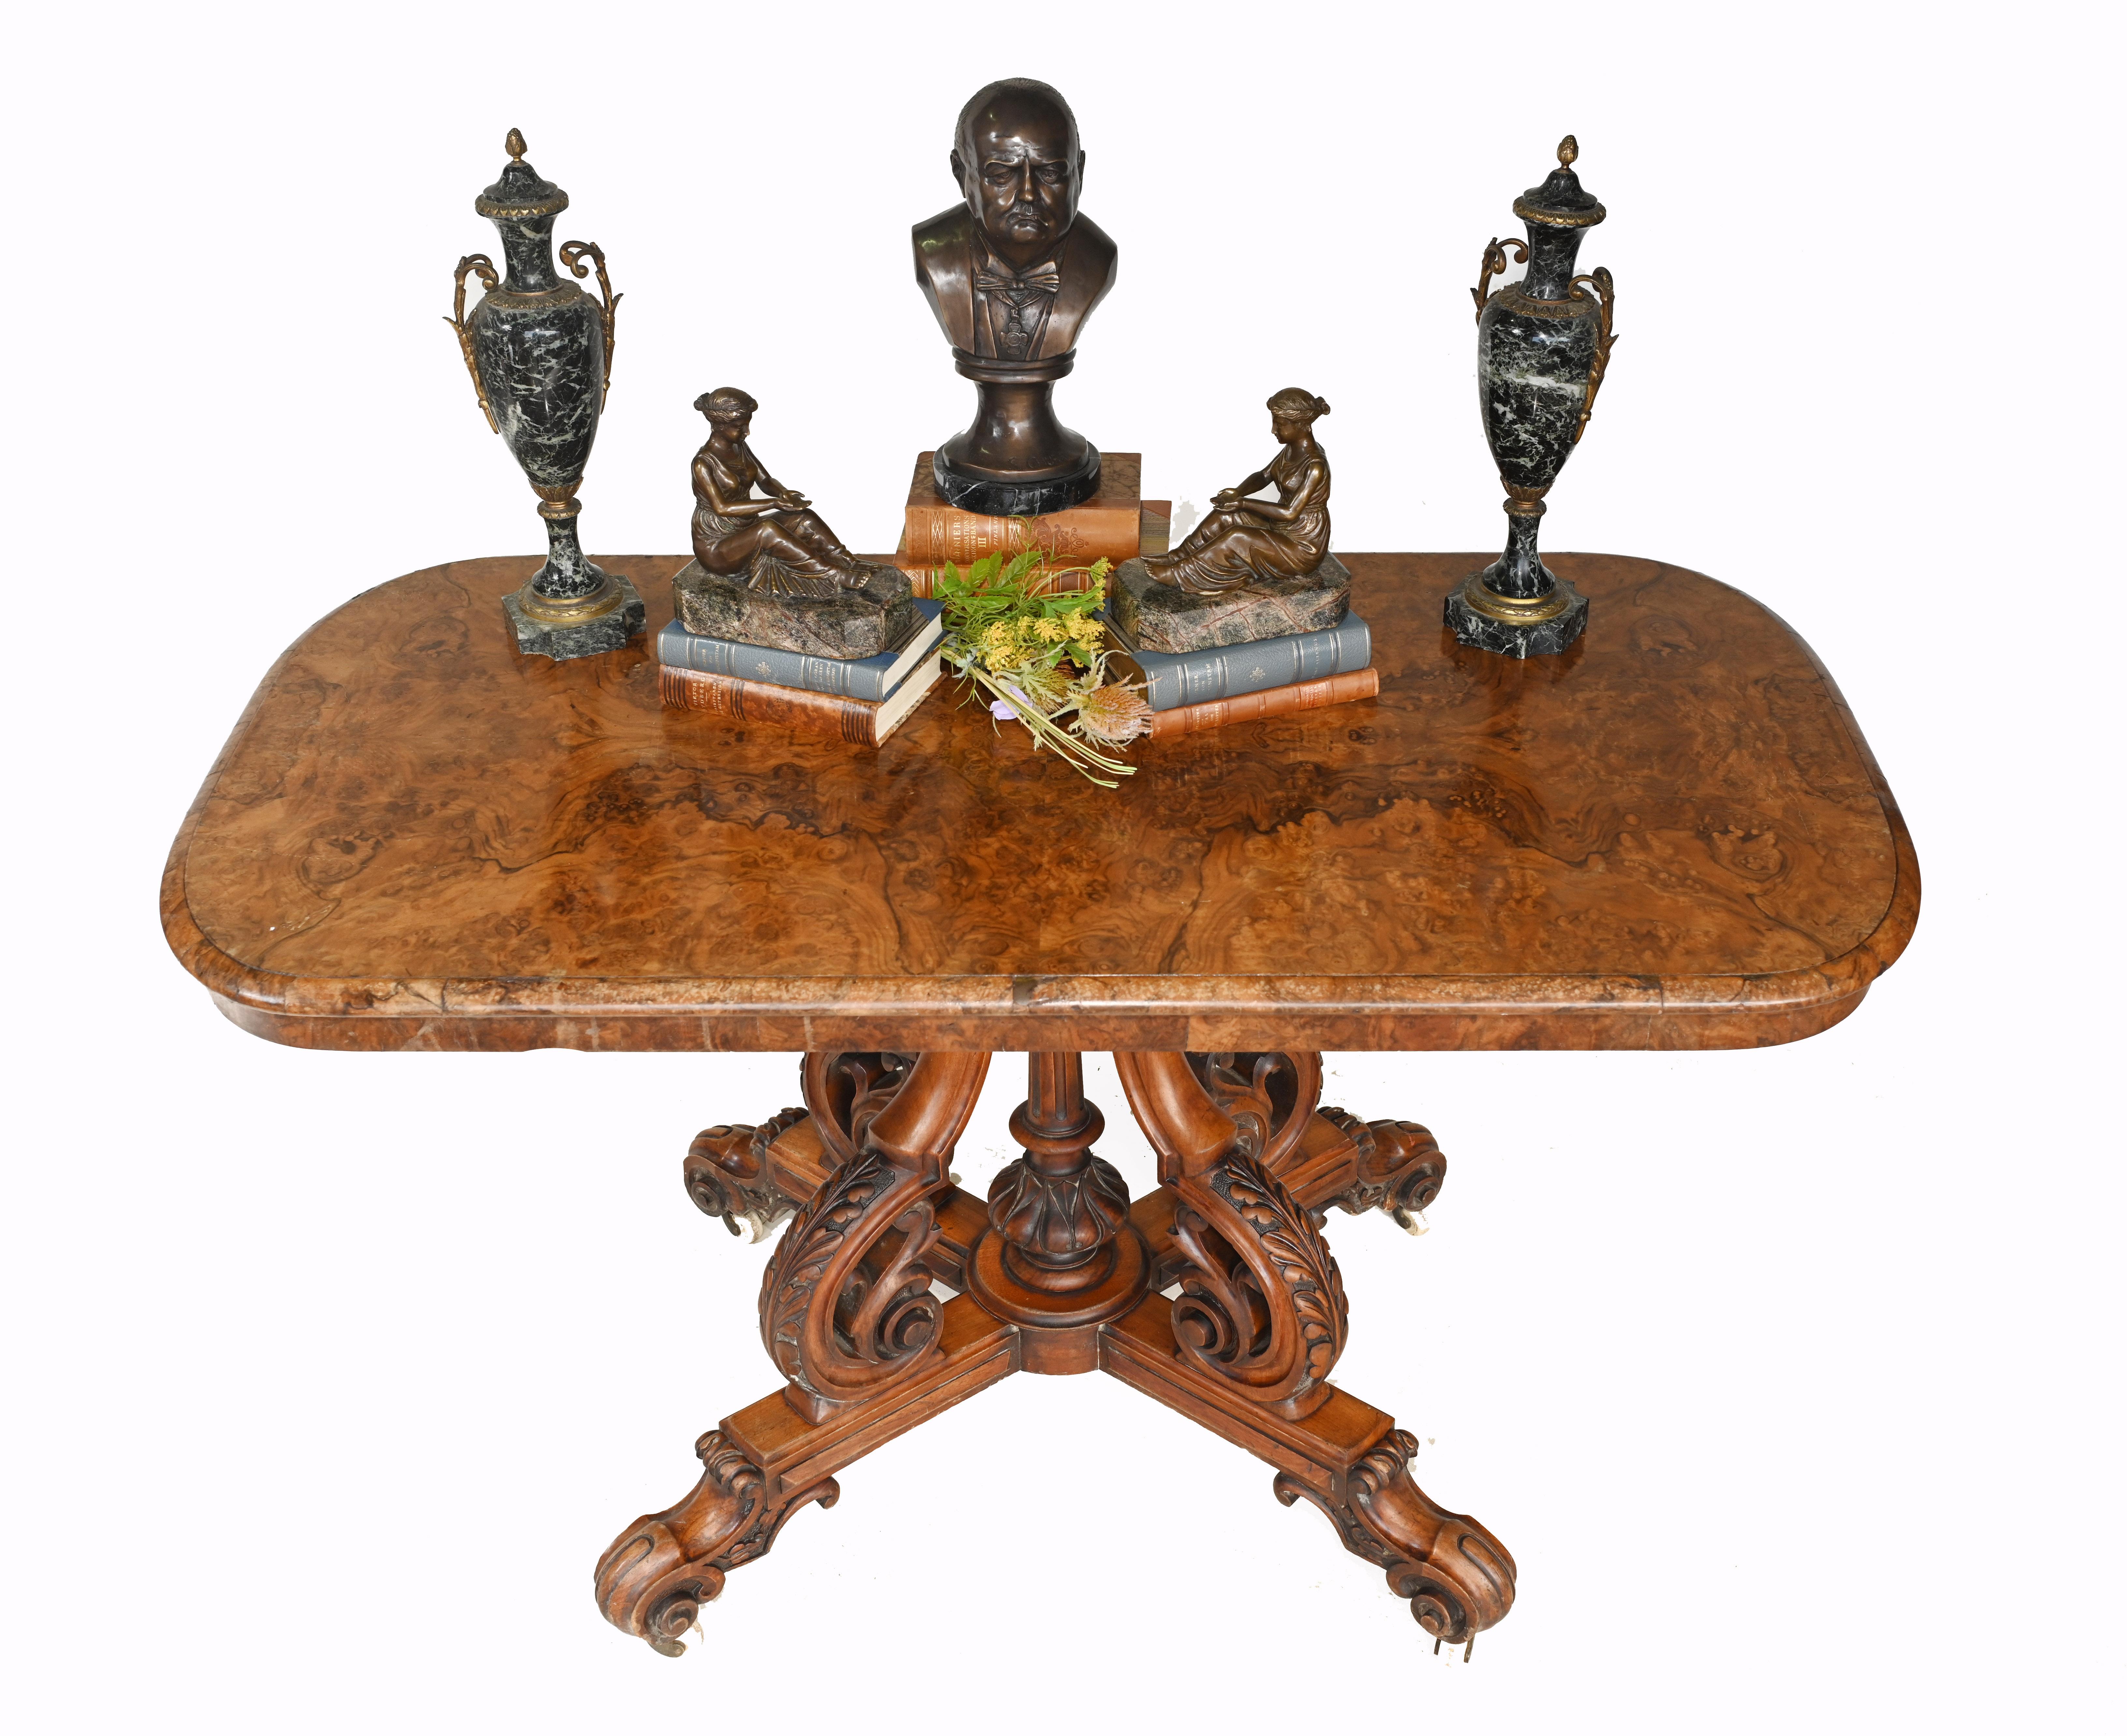 Stylish Victorian sofa table in walnut
Lovely finish to the burr walnut
We date this piece to circa 1860
Some of our items are in storage so please check ahead of a viewing to see if it is on our shop floor
Offered in great shape ready for home